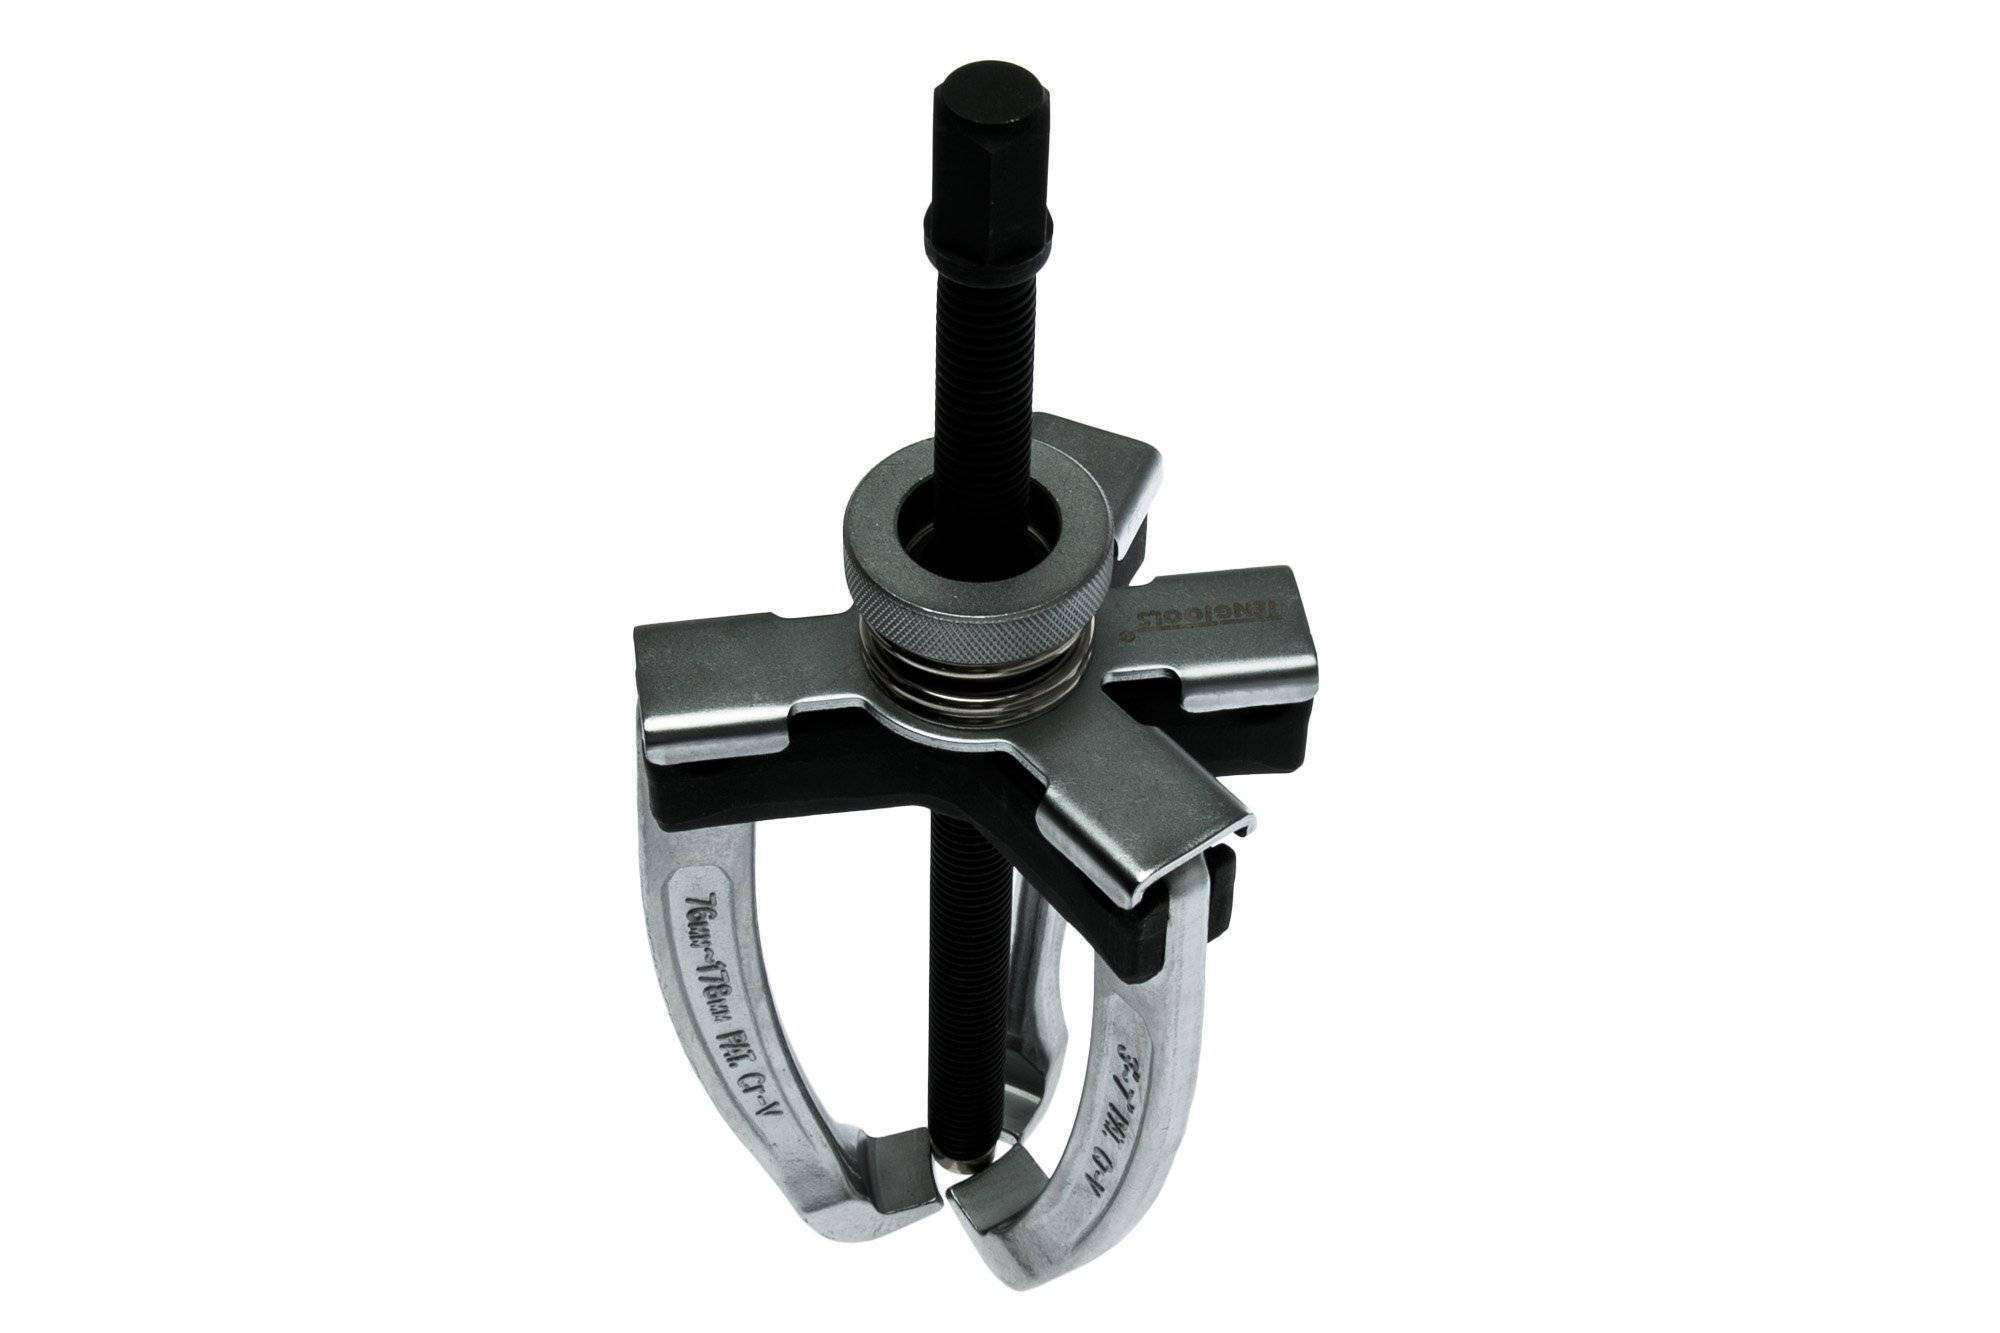 Teng Tools 7 Inch Gear Puller Gear Removal Tool - SP22